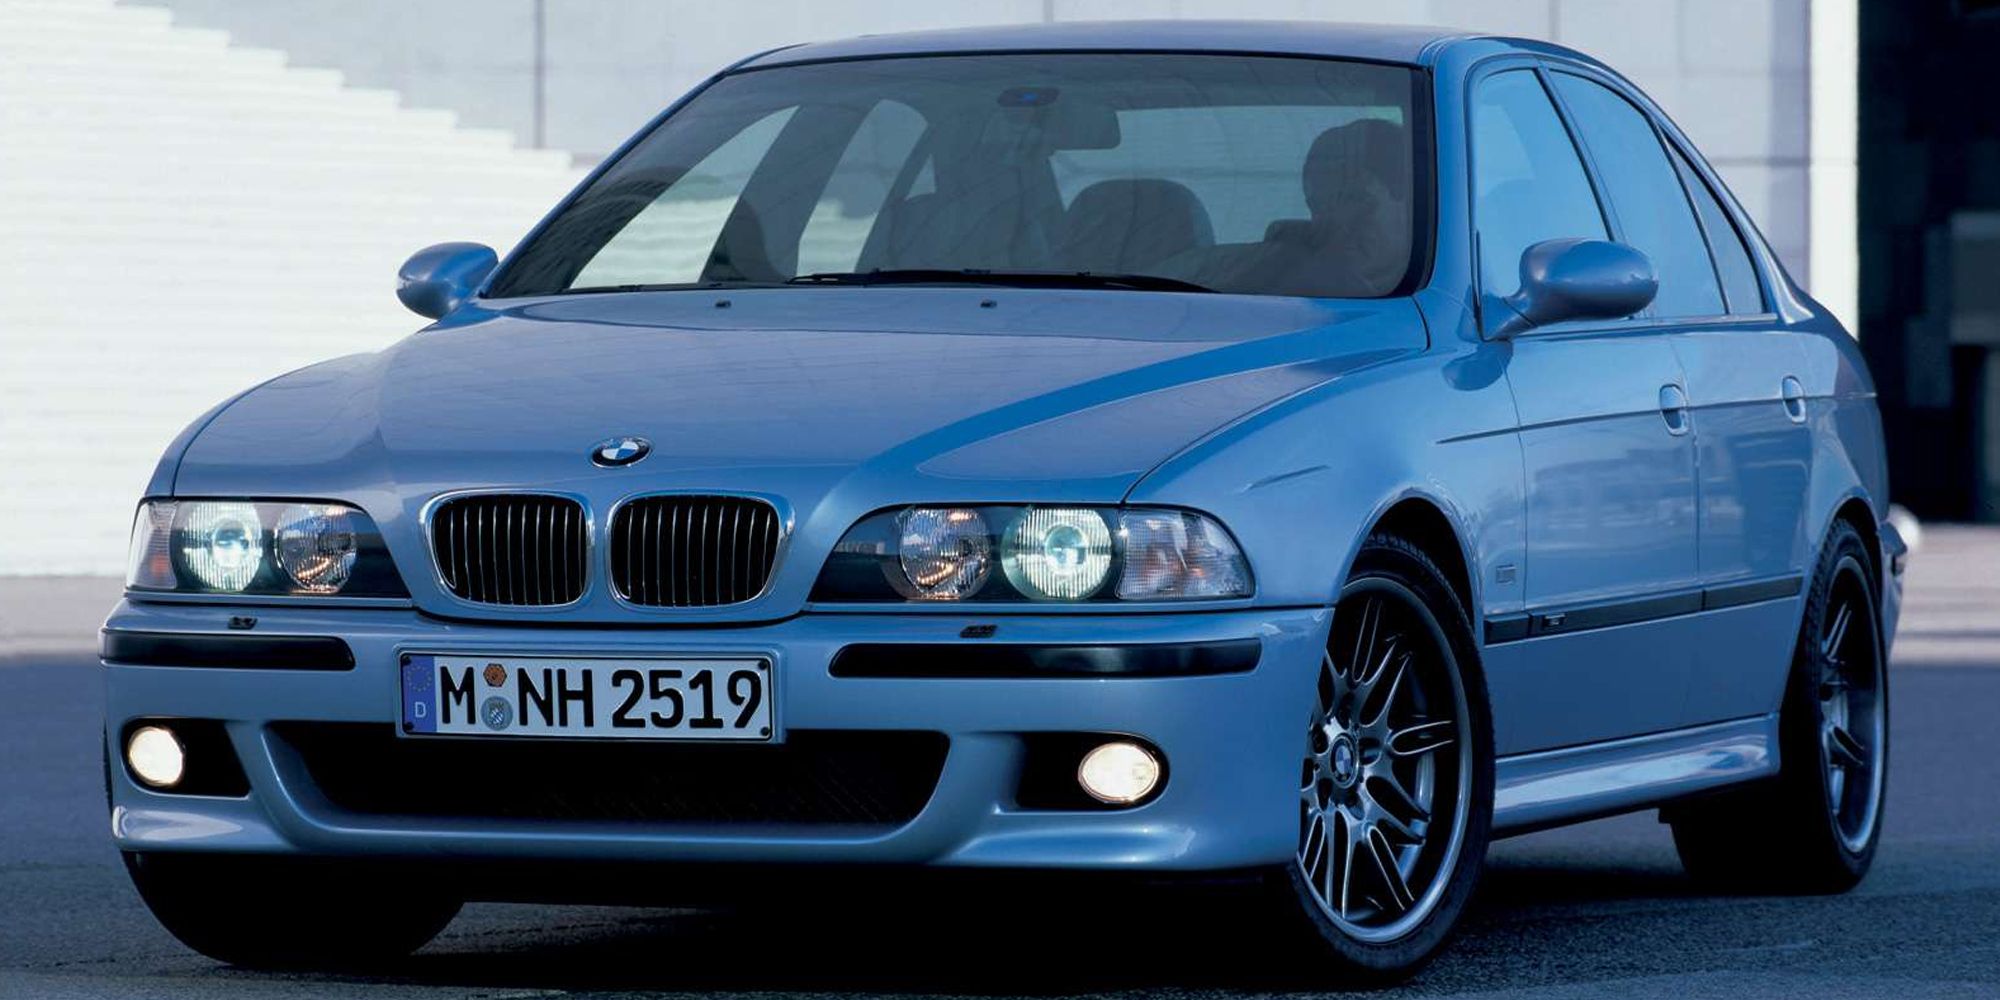 The BMW E39 M5 is overrated